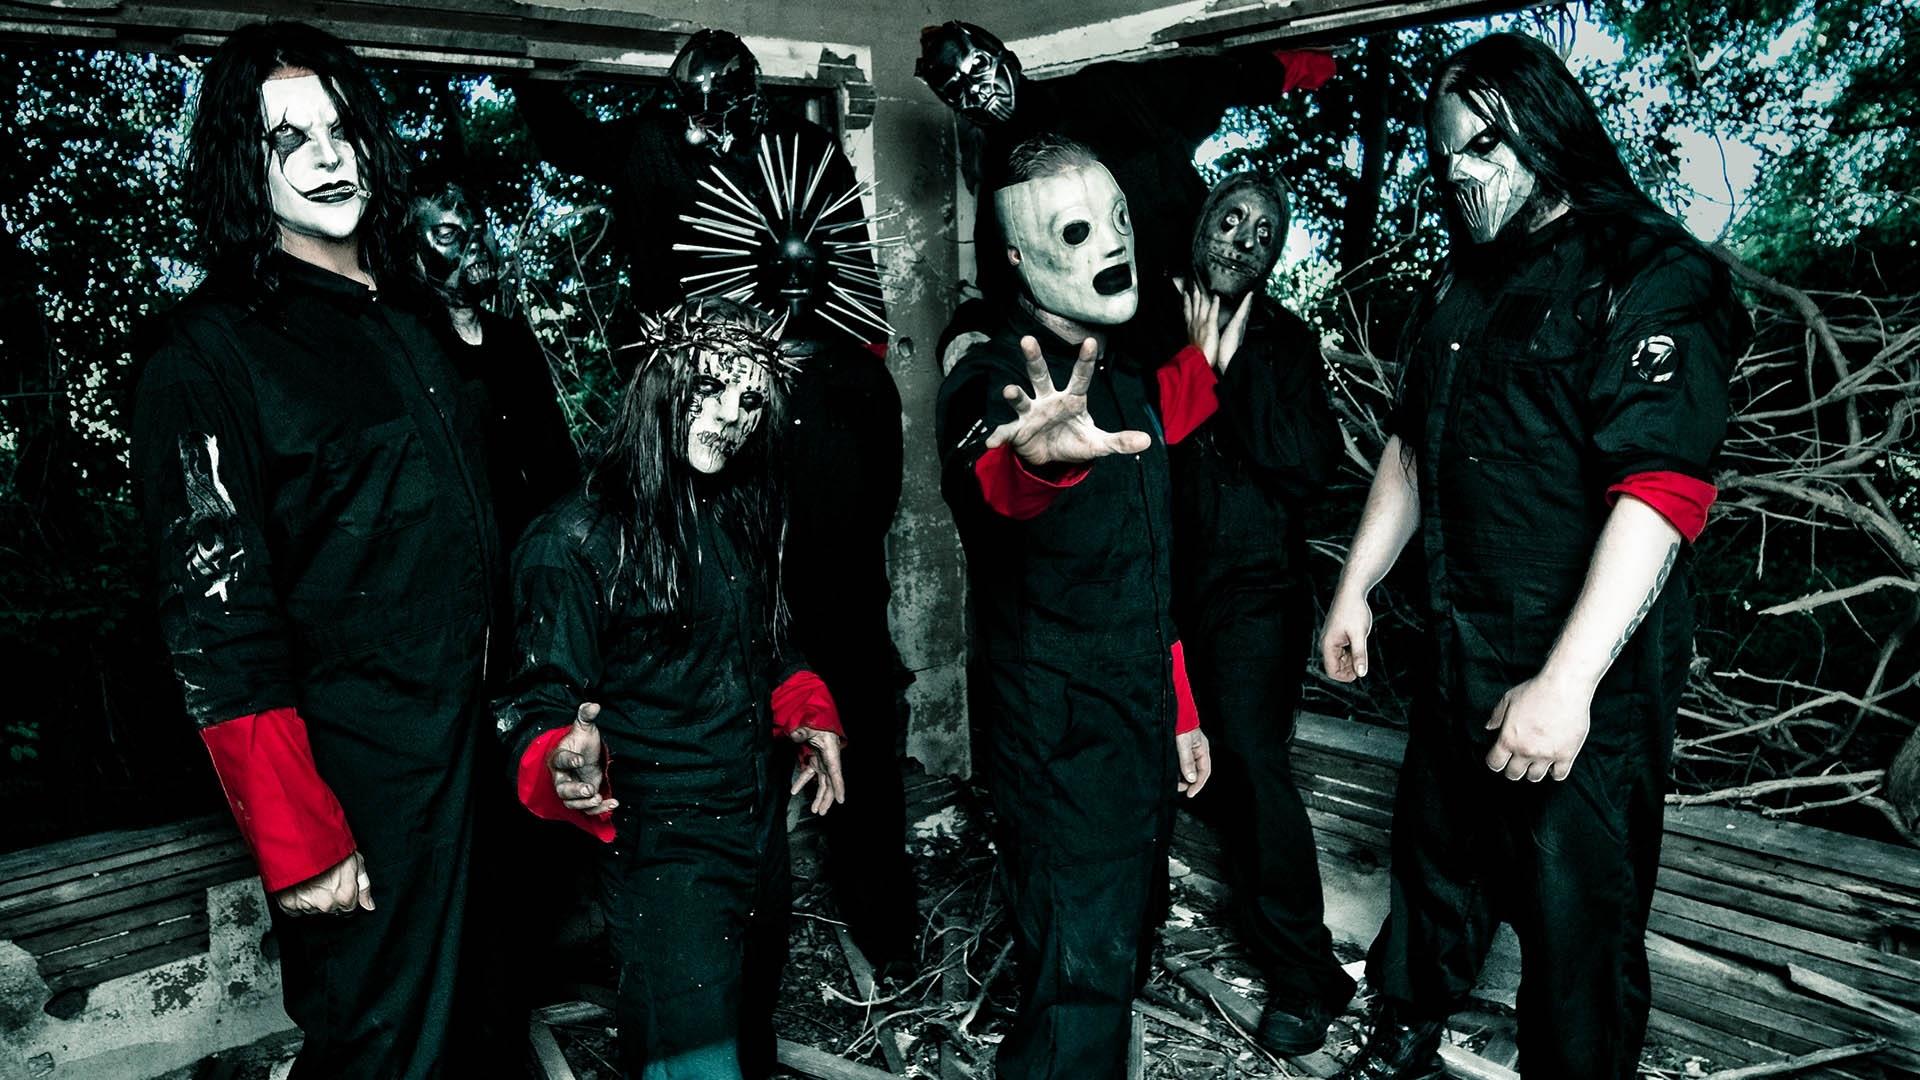 All 10 members of the band are having new masks for their latest album